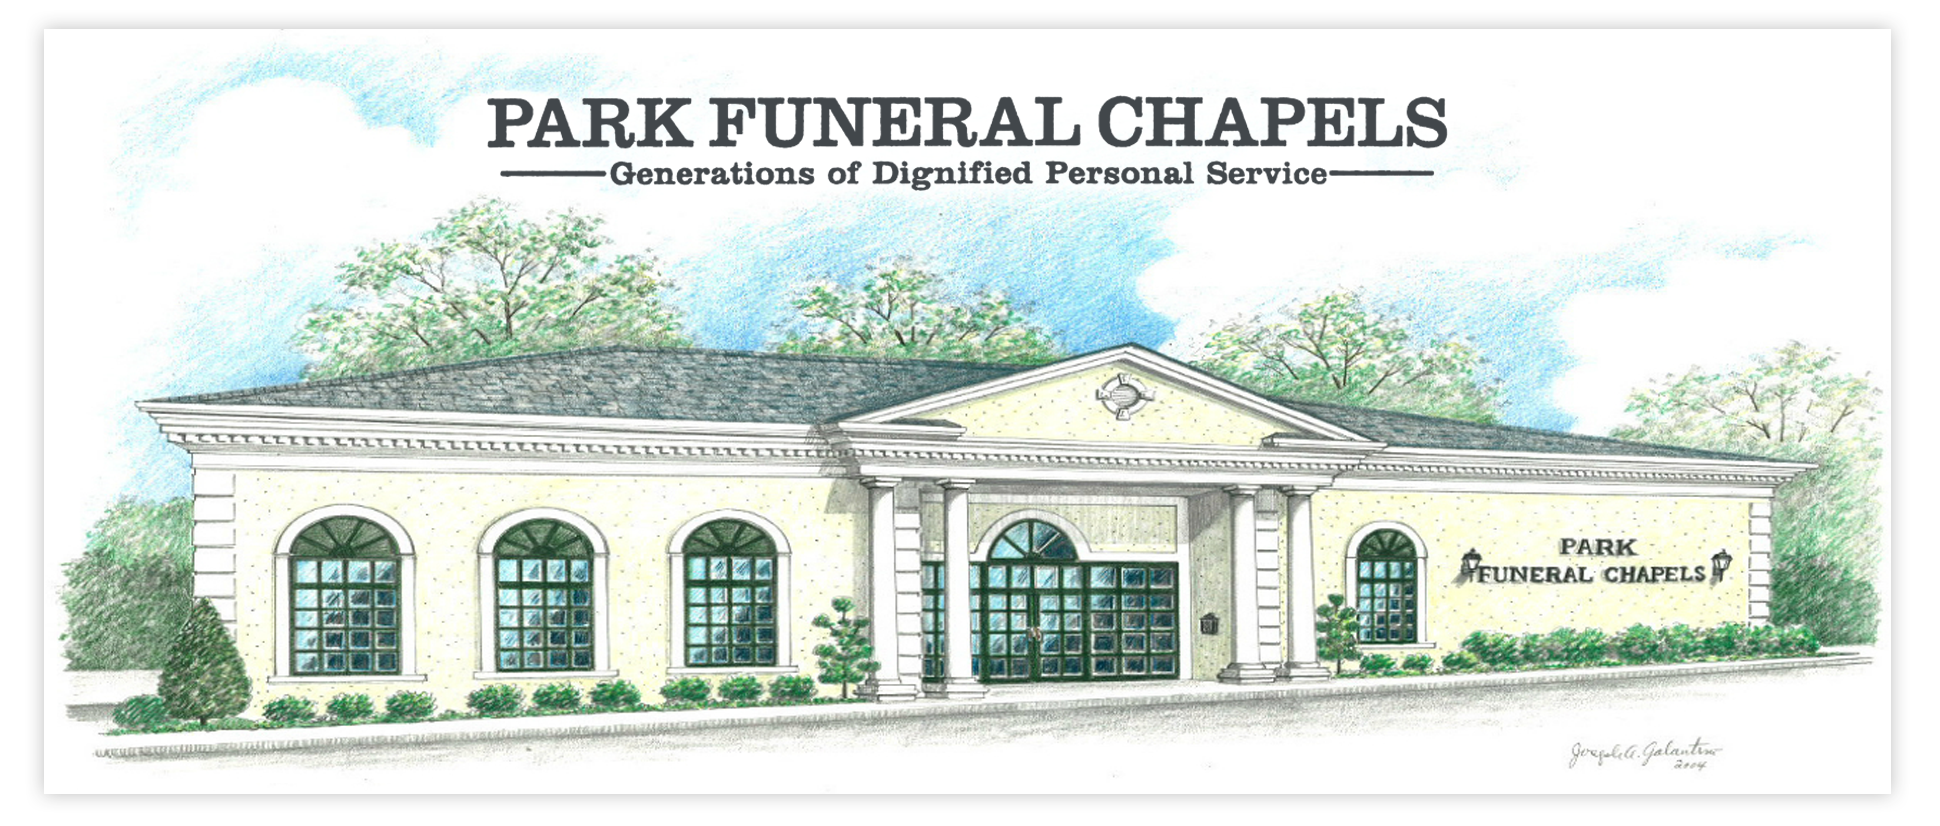 Buster reccomend Funeral homes in garden city